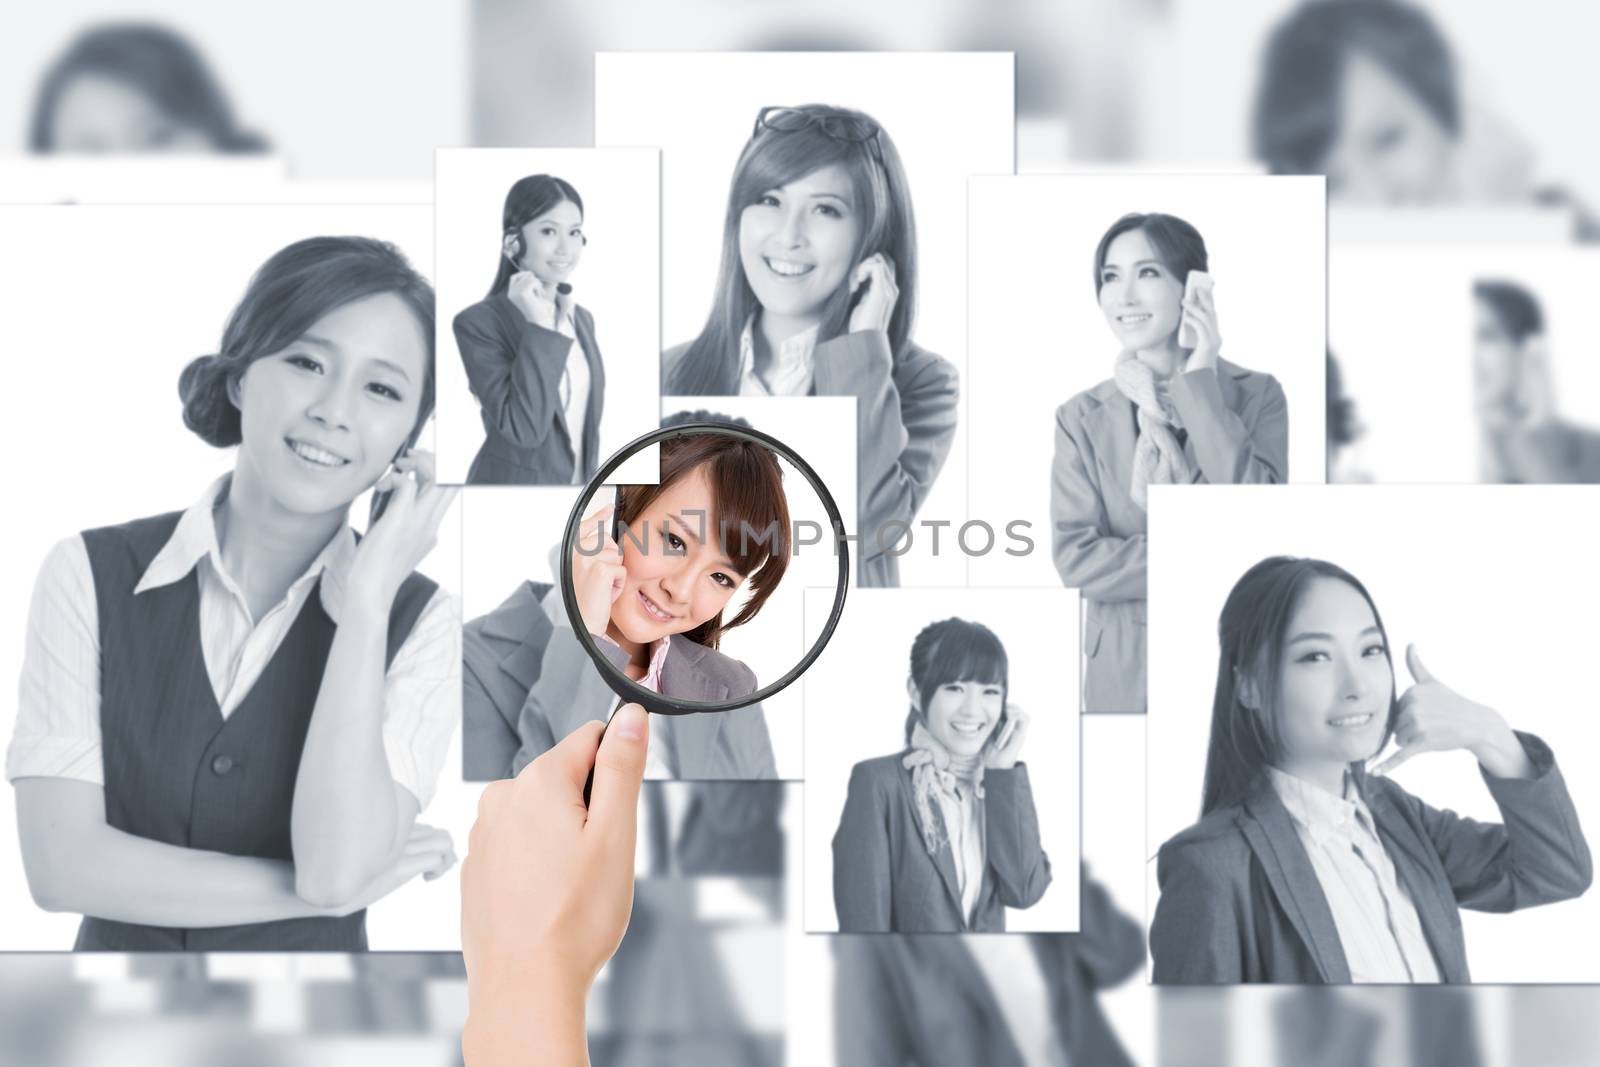 Concept of human resources, choose the right person from the people screen wall.